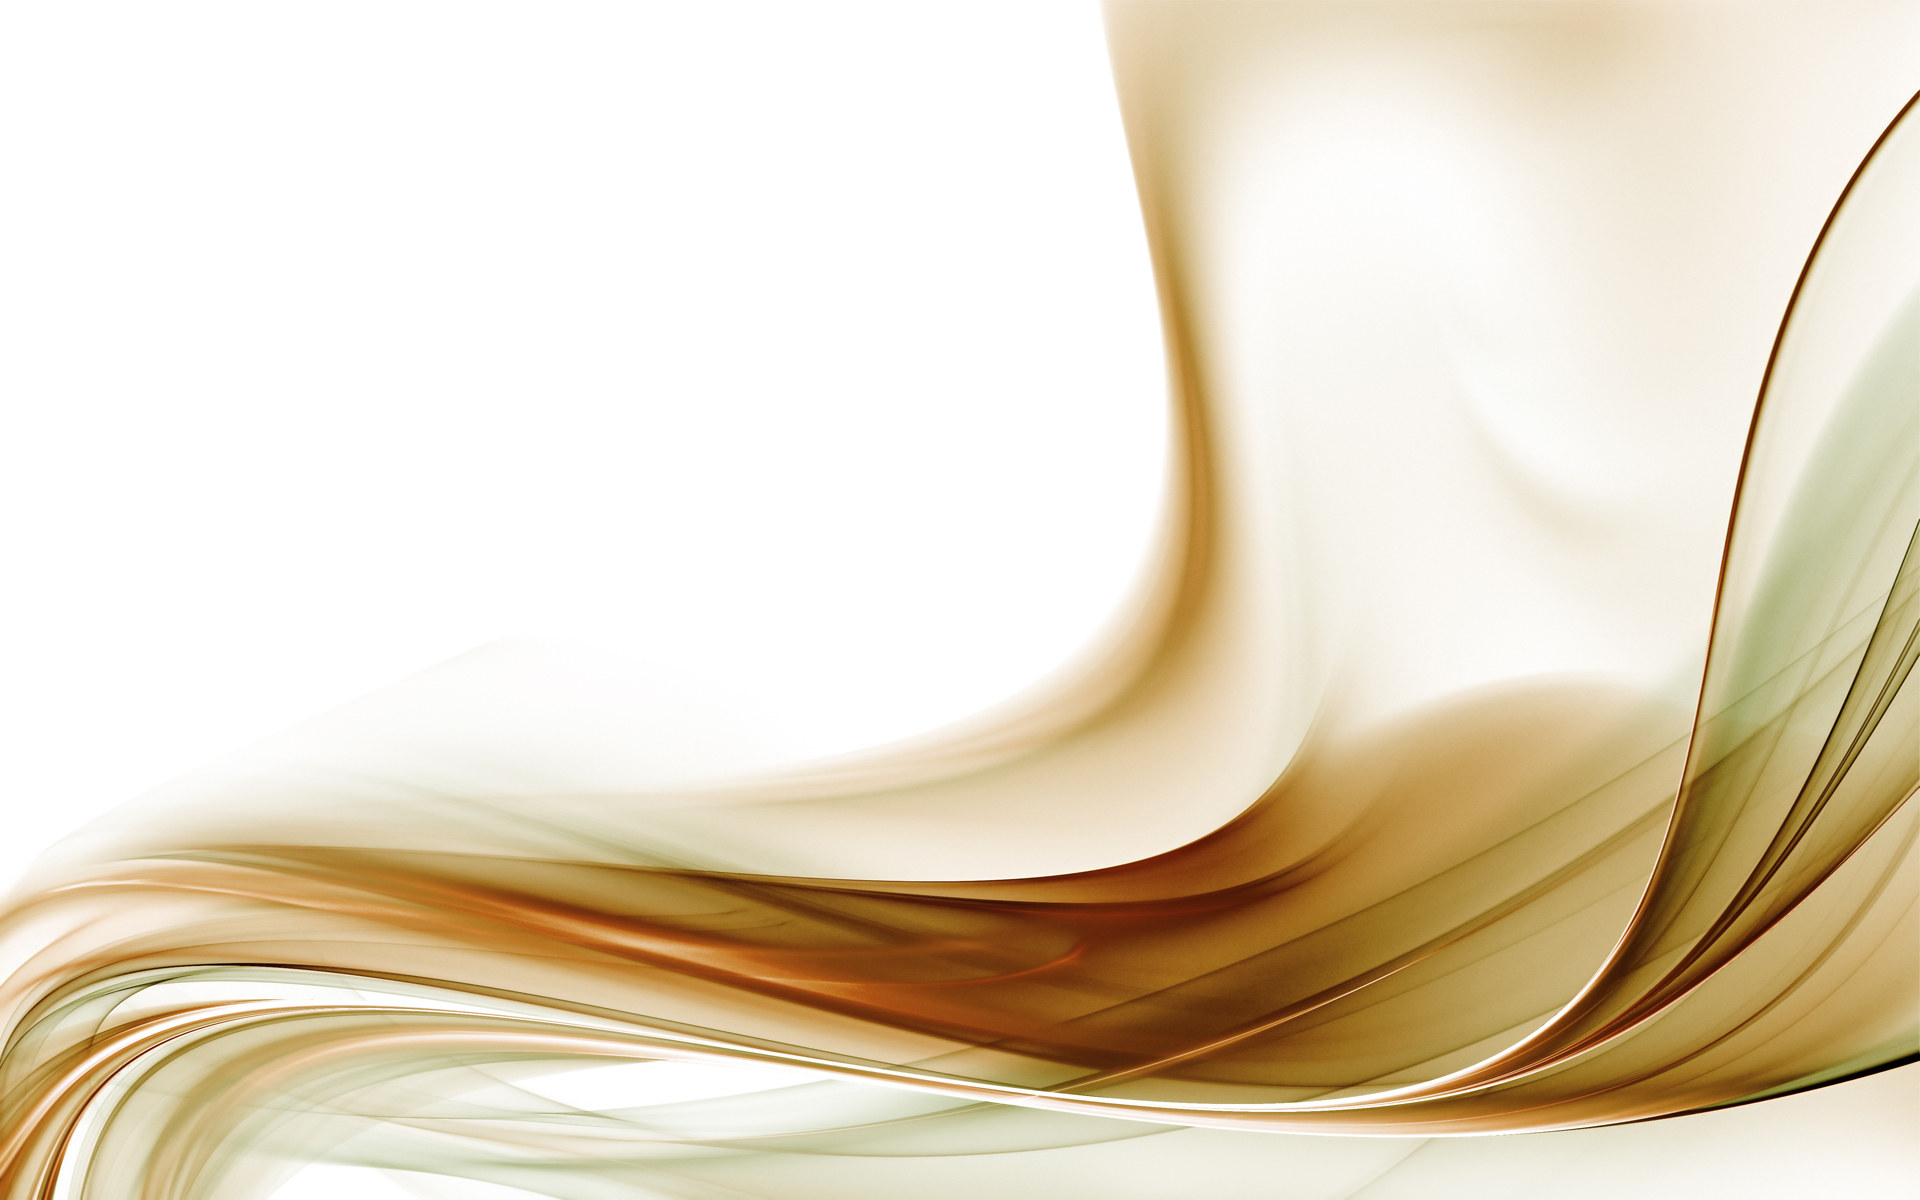 wallpaper 96264 Gold Abstract With White Background HD Wallpaper Image